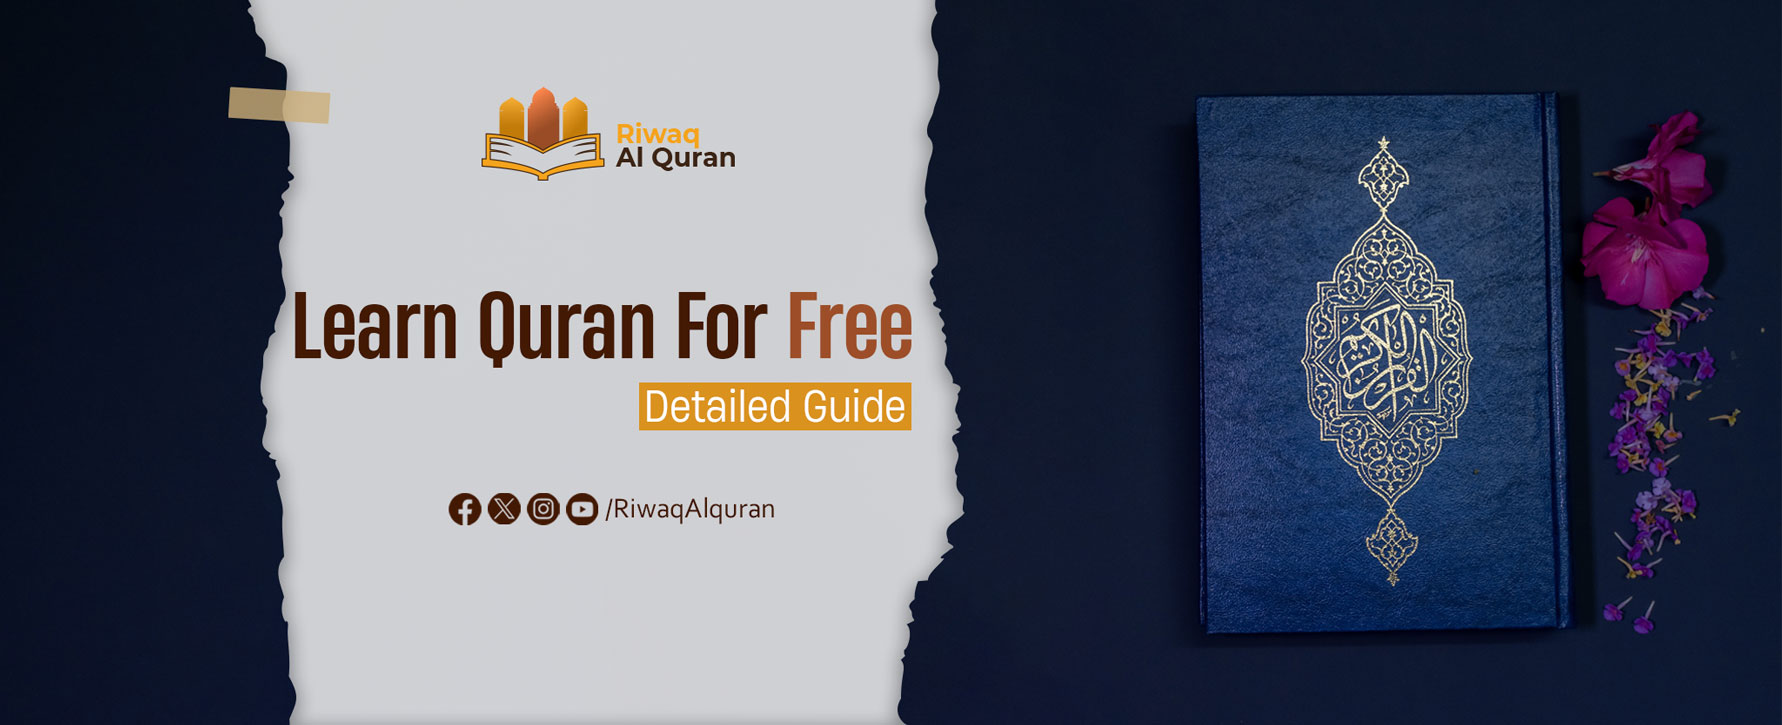 Learn Quran Freely: Fruitful Tactics and Resources